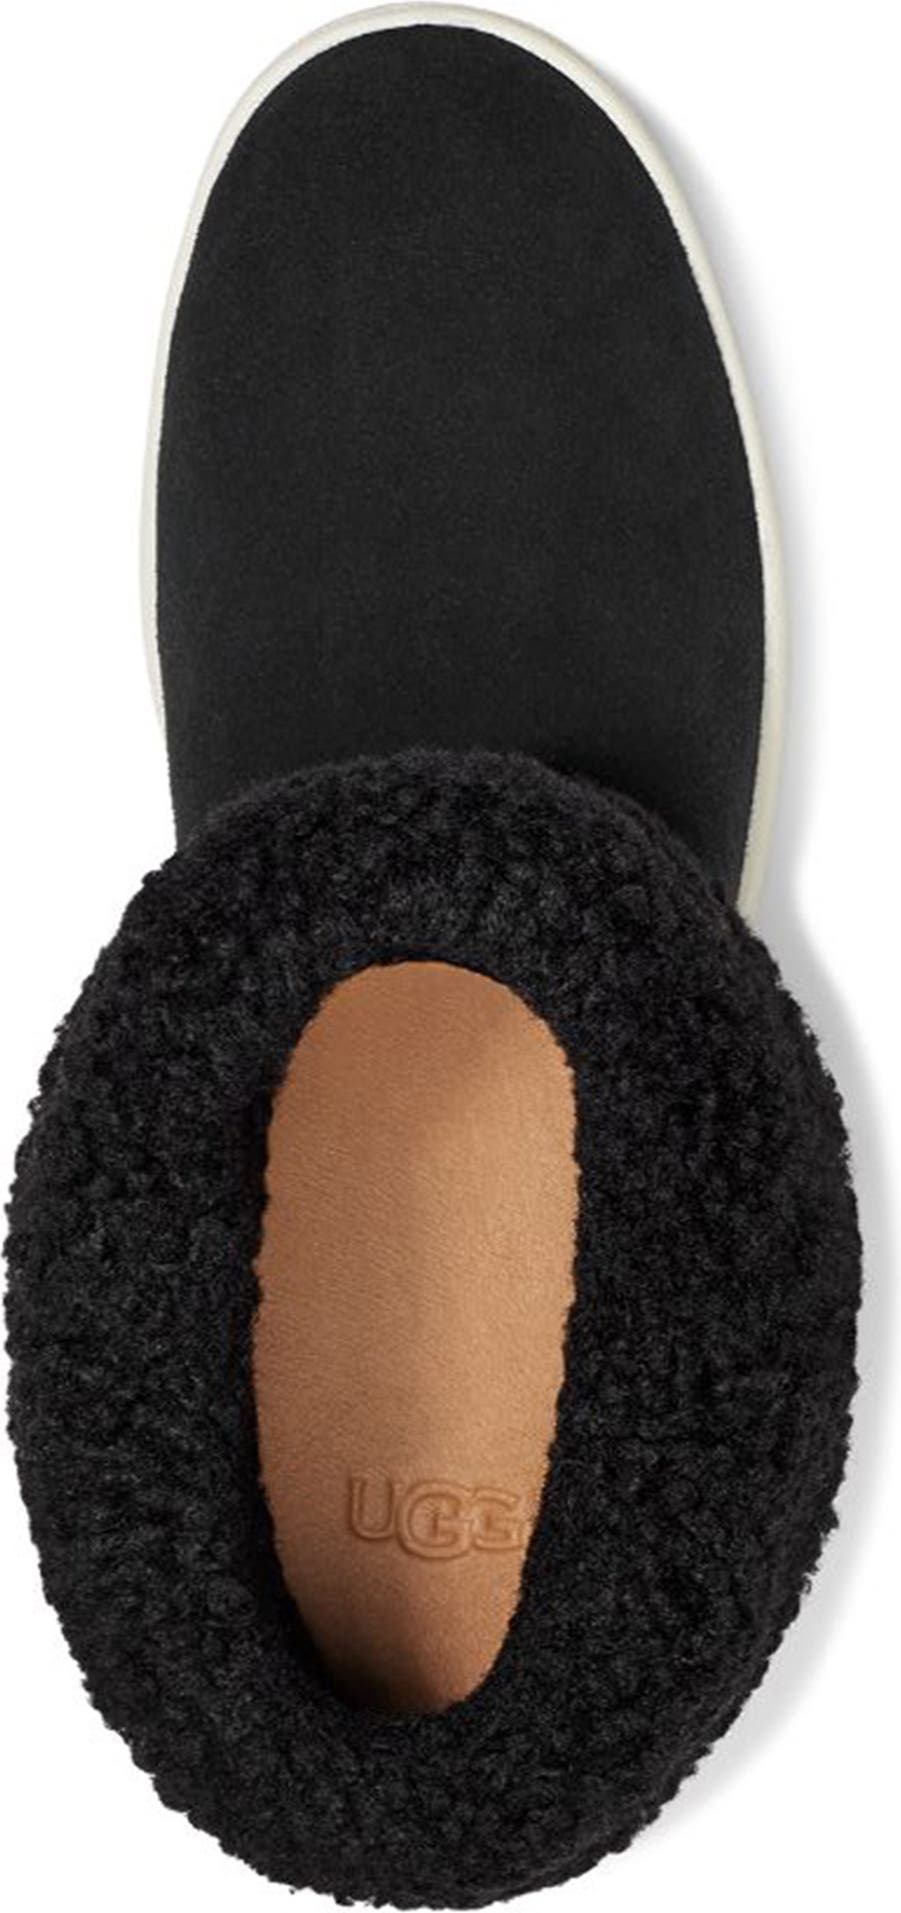 UGG<SUP>®</SUP> UGG Mika Faux Shearling Cuff Boot, Alternate, color, BLACK